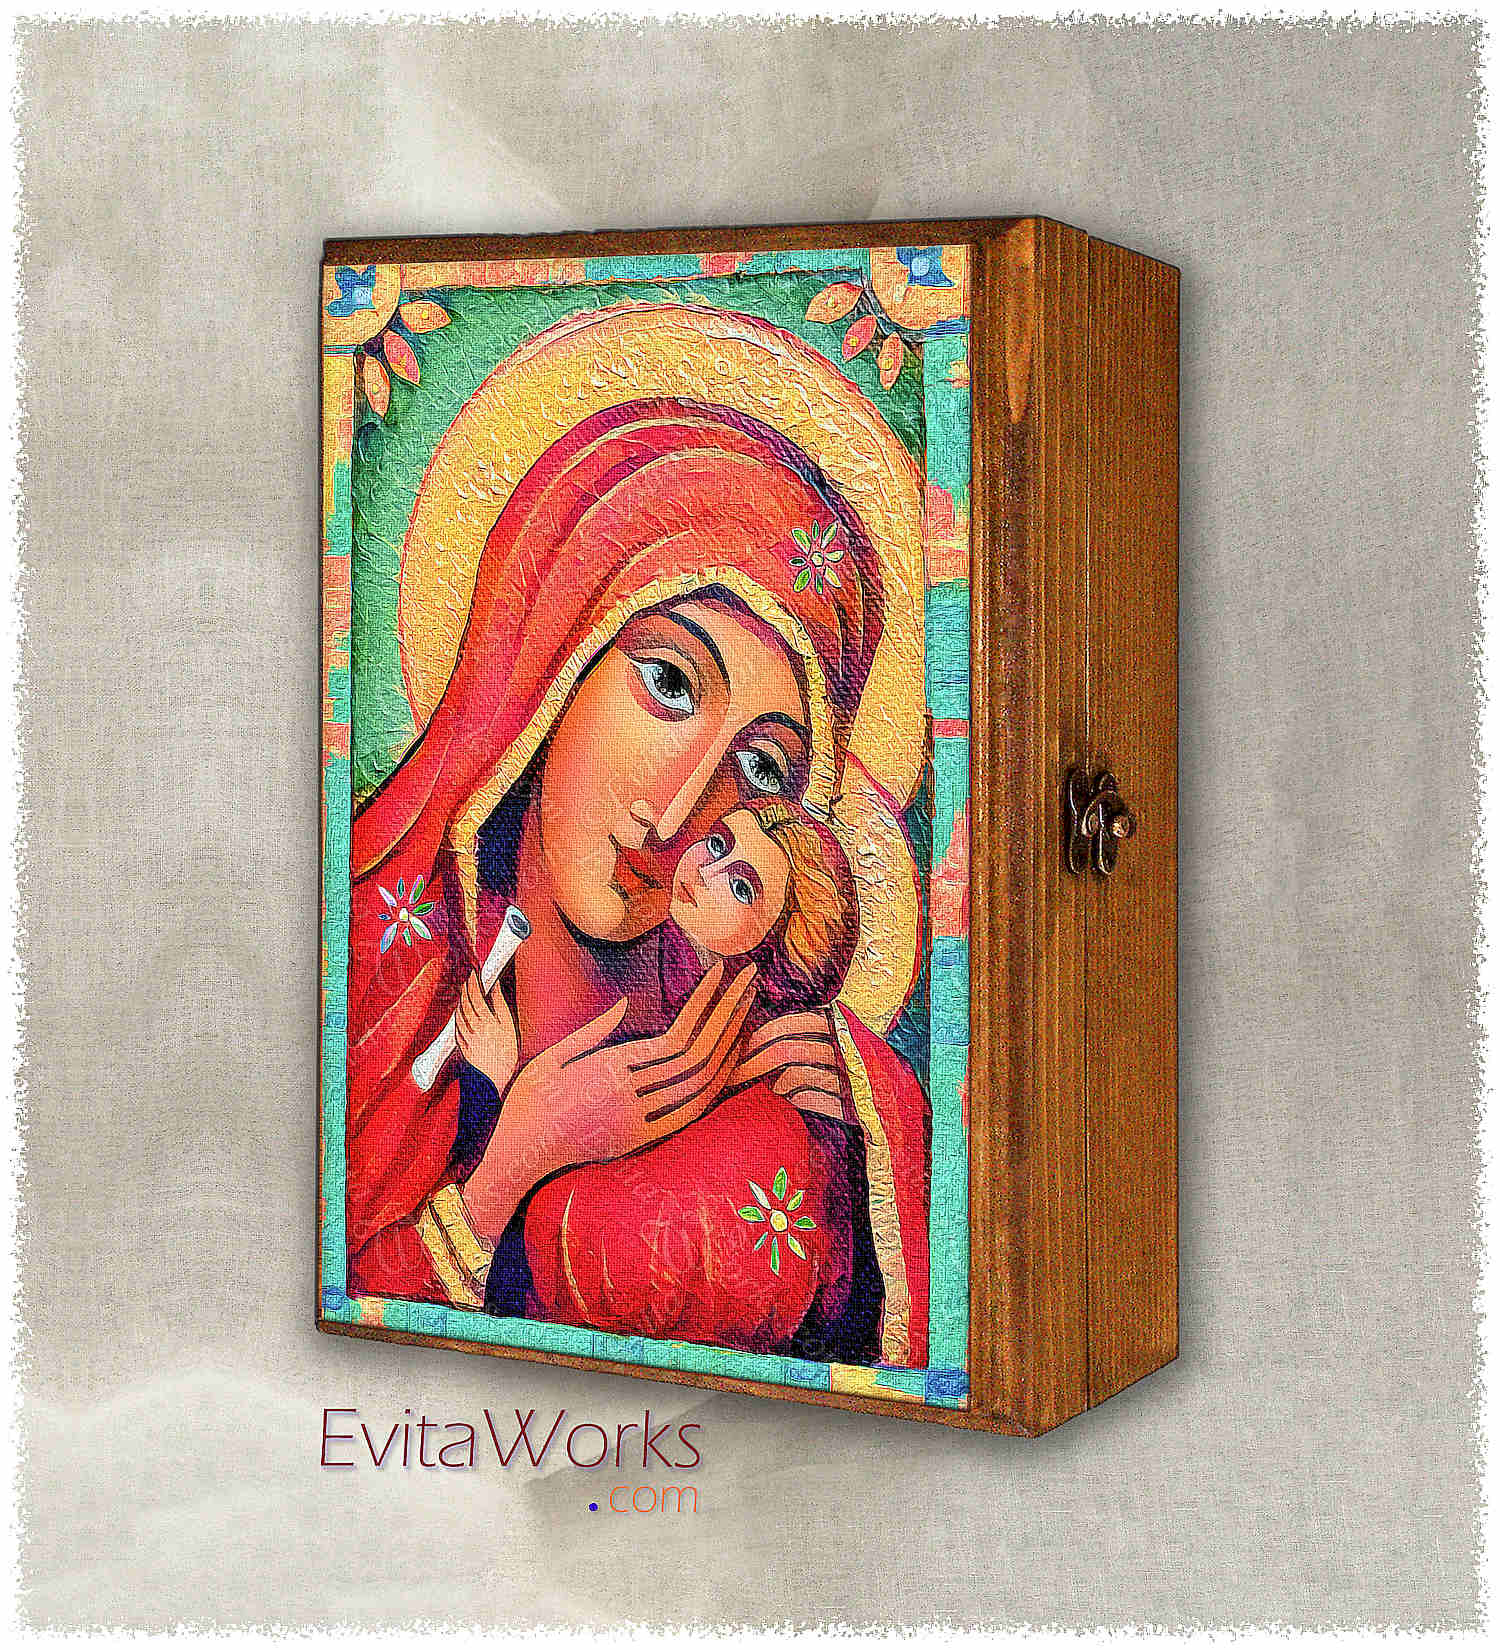 Hit to learn about "Mother and Child, icon" on jewelboxes